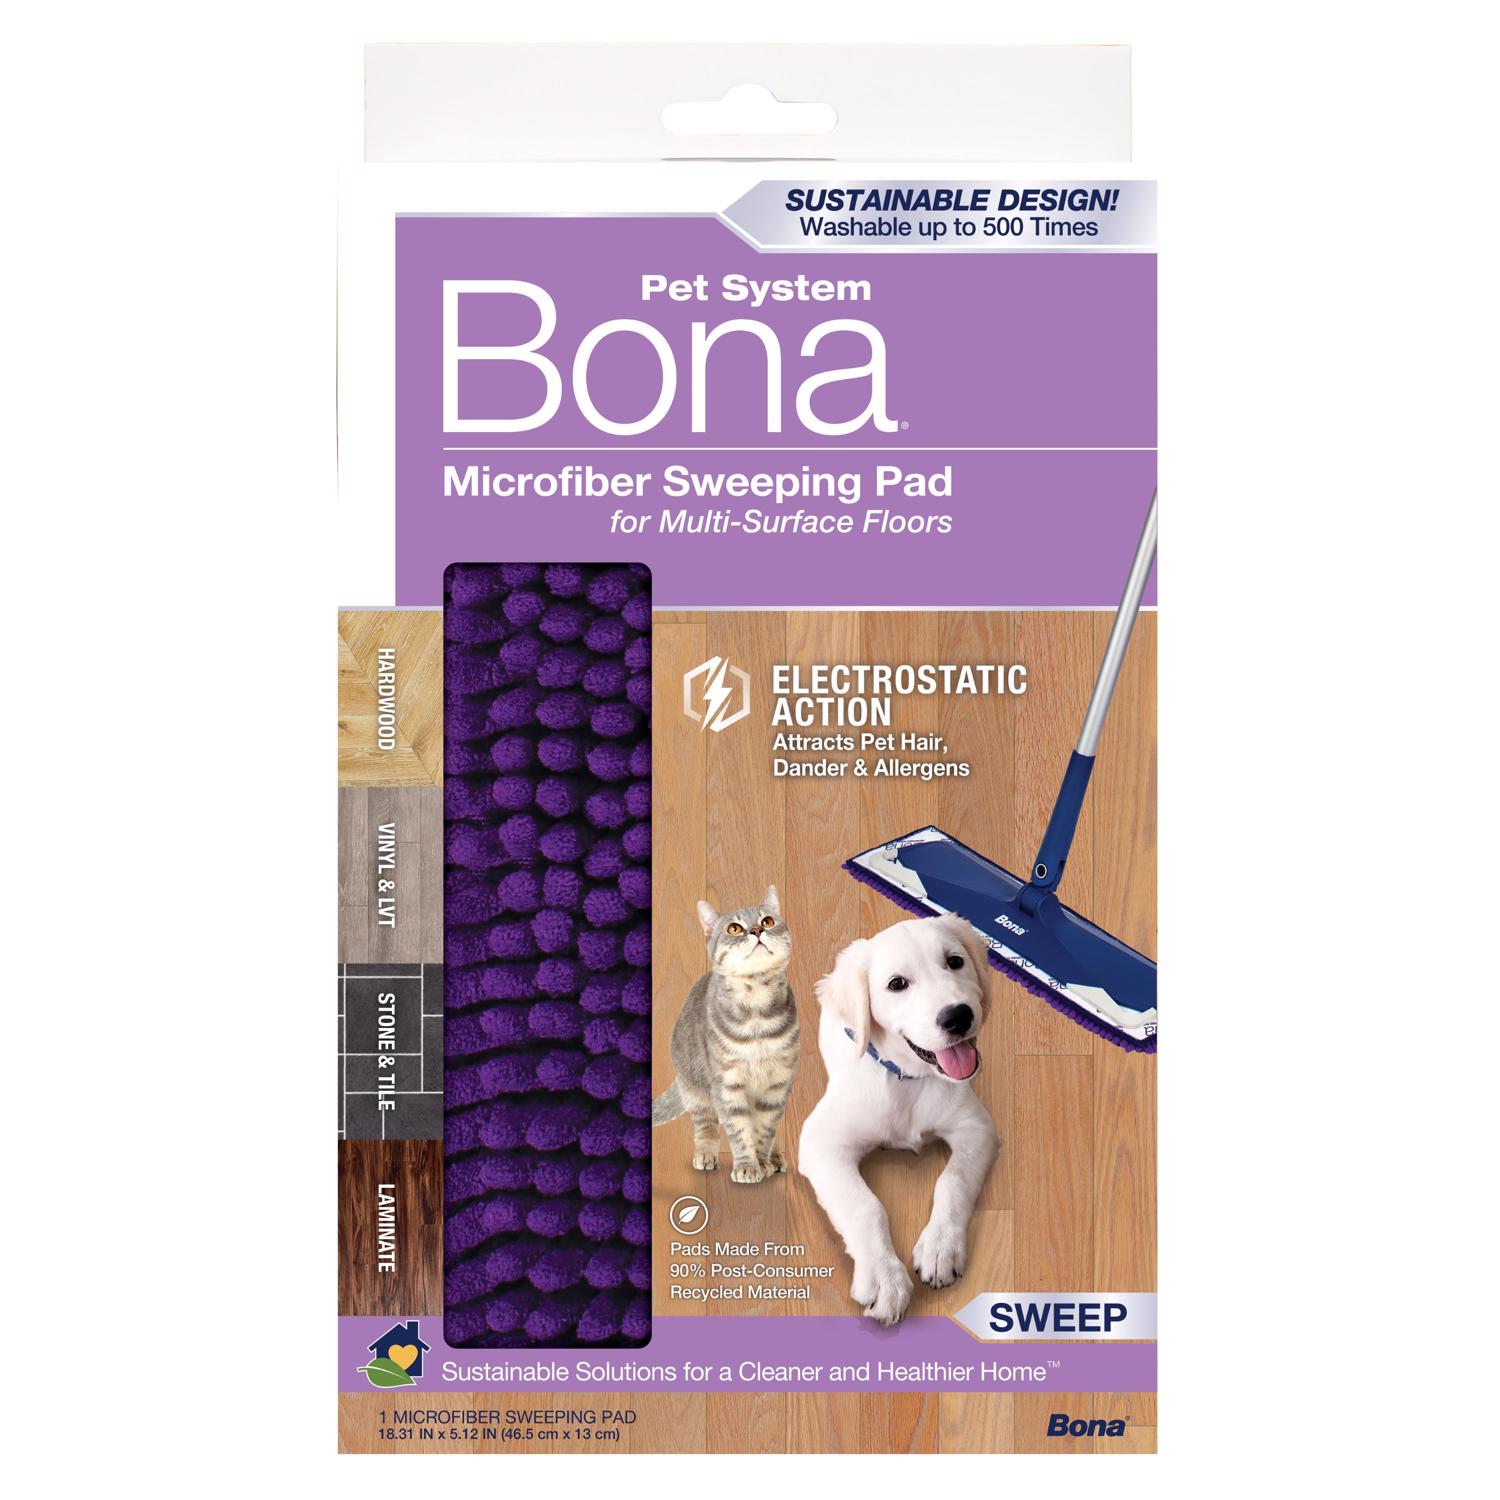 Photos - Household Cleaning Tool Bona 8.31 in. Microfiber Sweeping Pad 1 pk AX0003628 